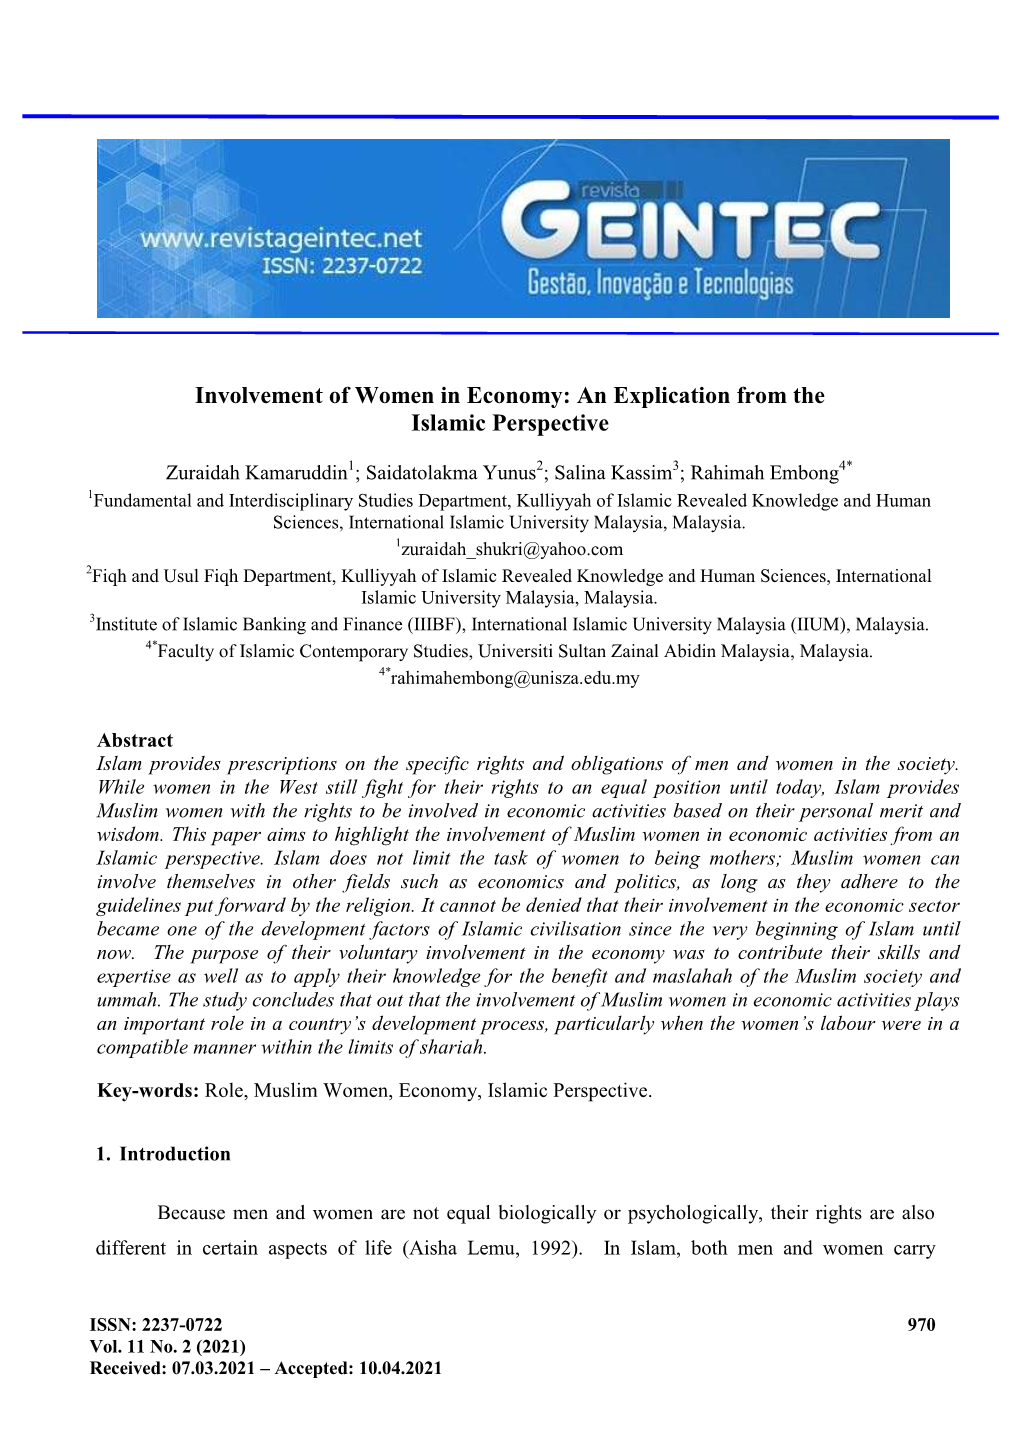 Involvement of Women in Economy: an Explication from the Islamic Perspective